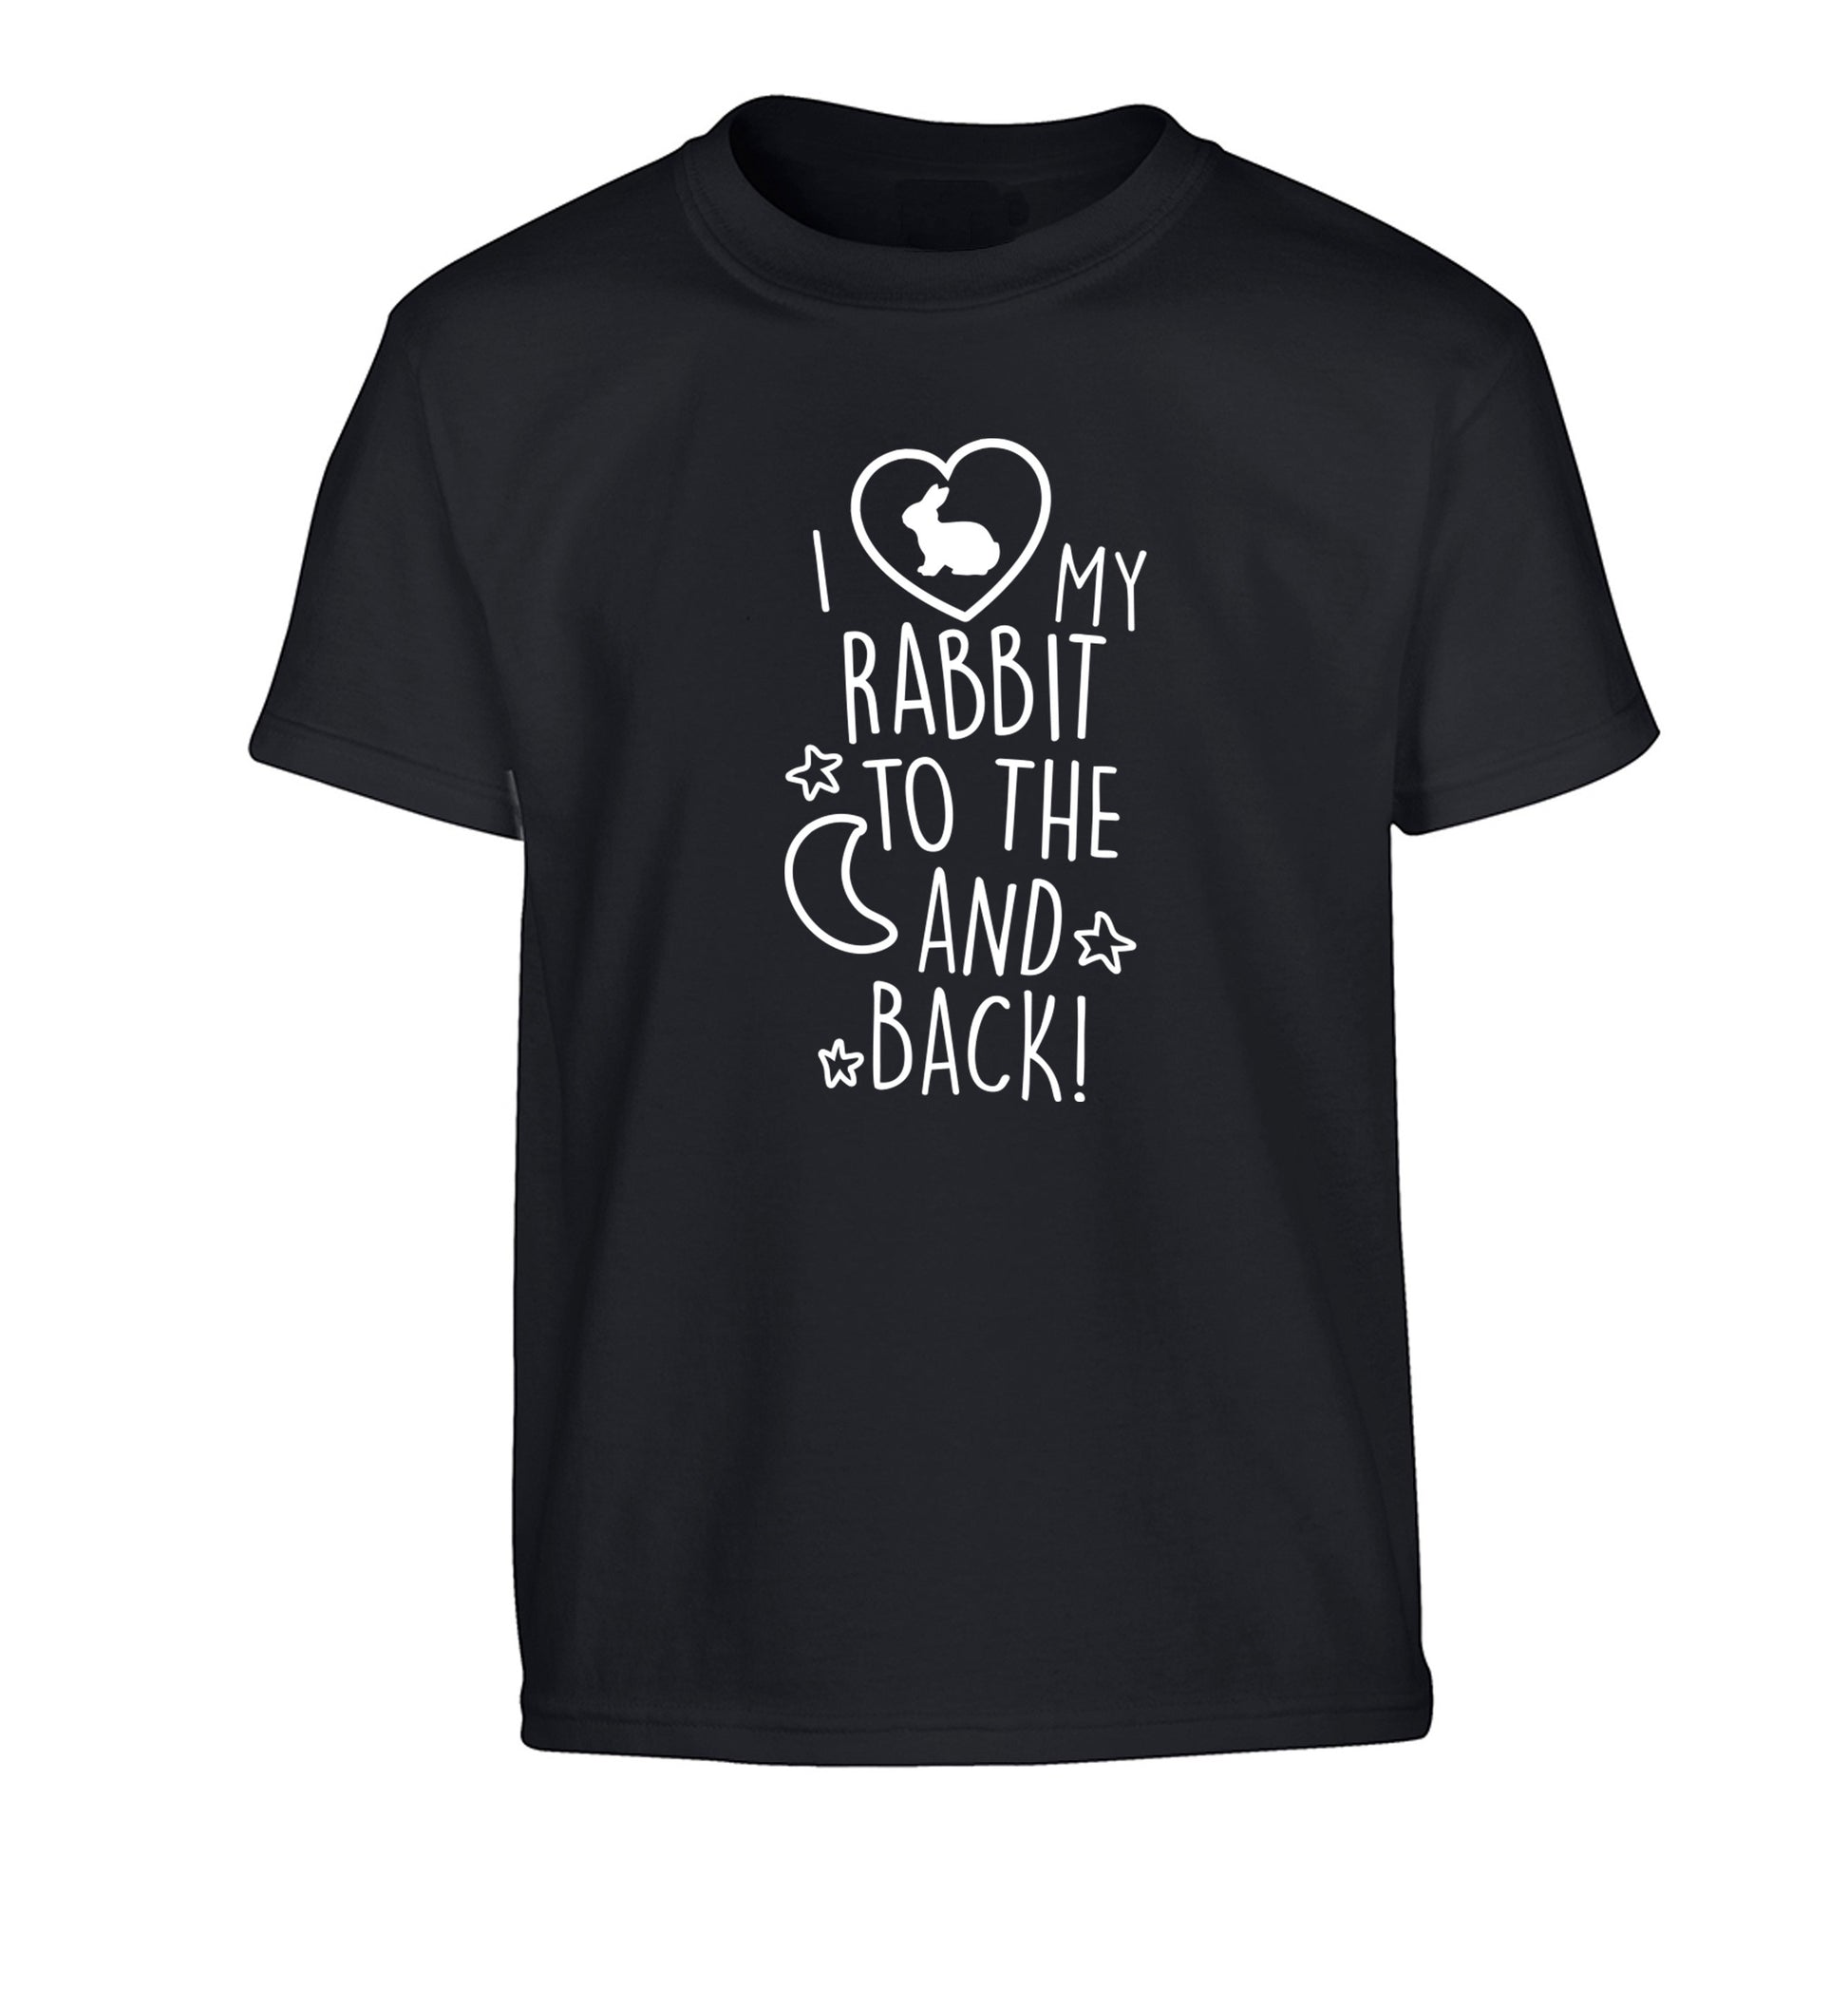 I love my rabbit to the moon and back Children's black Tshirt 12-14 Years